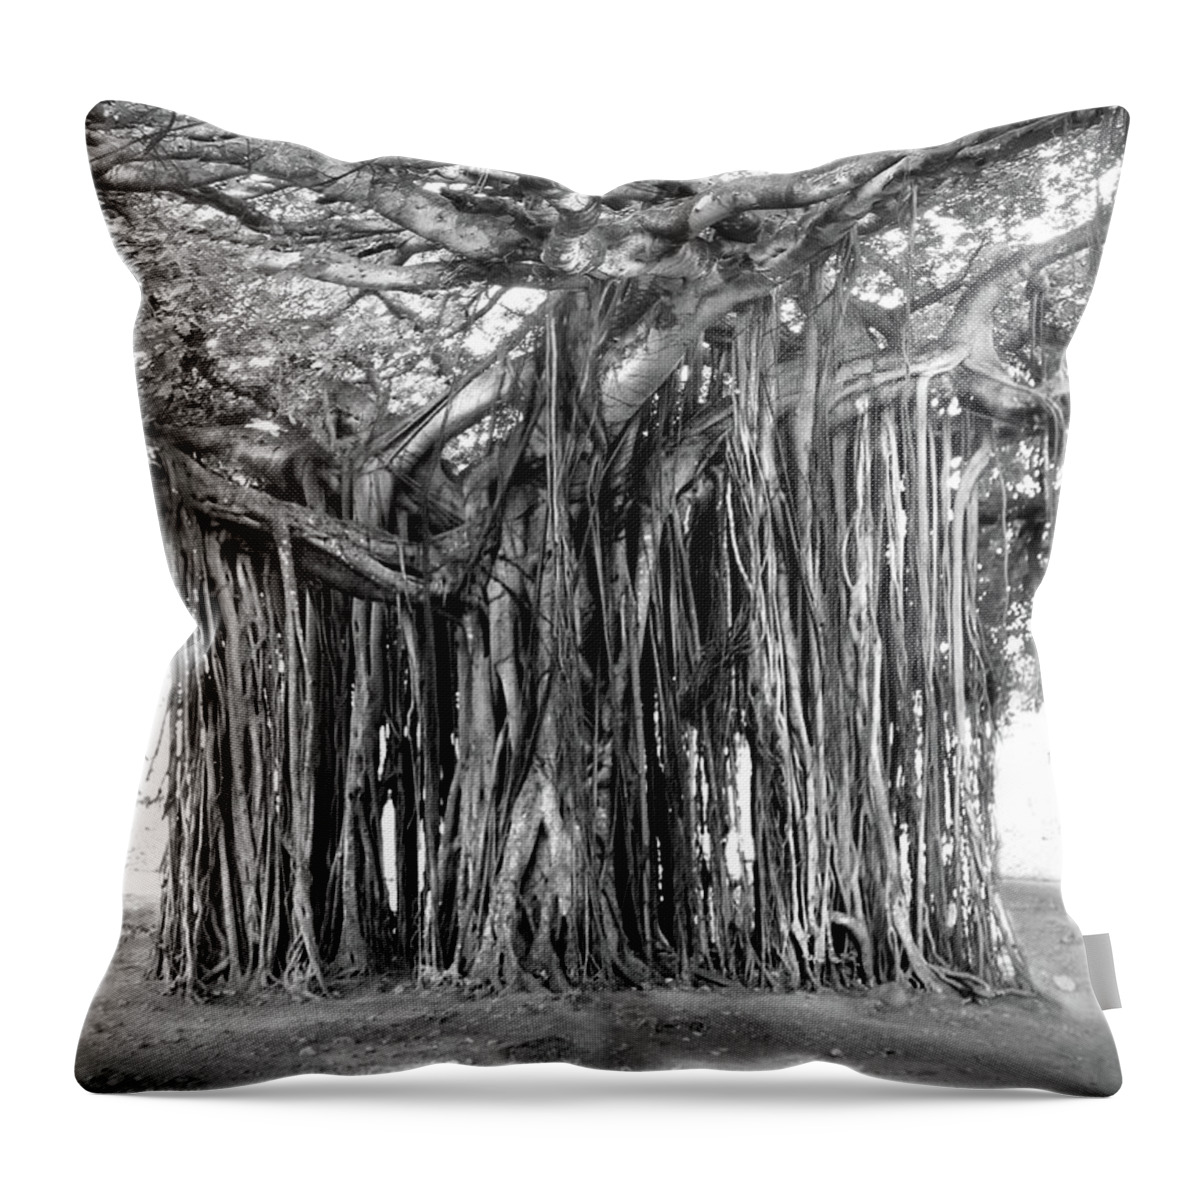 Fine Art Throw Pillow featuring the photograph Tree with Many Trunks by Mike McGlothlen